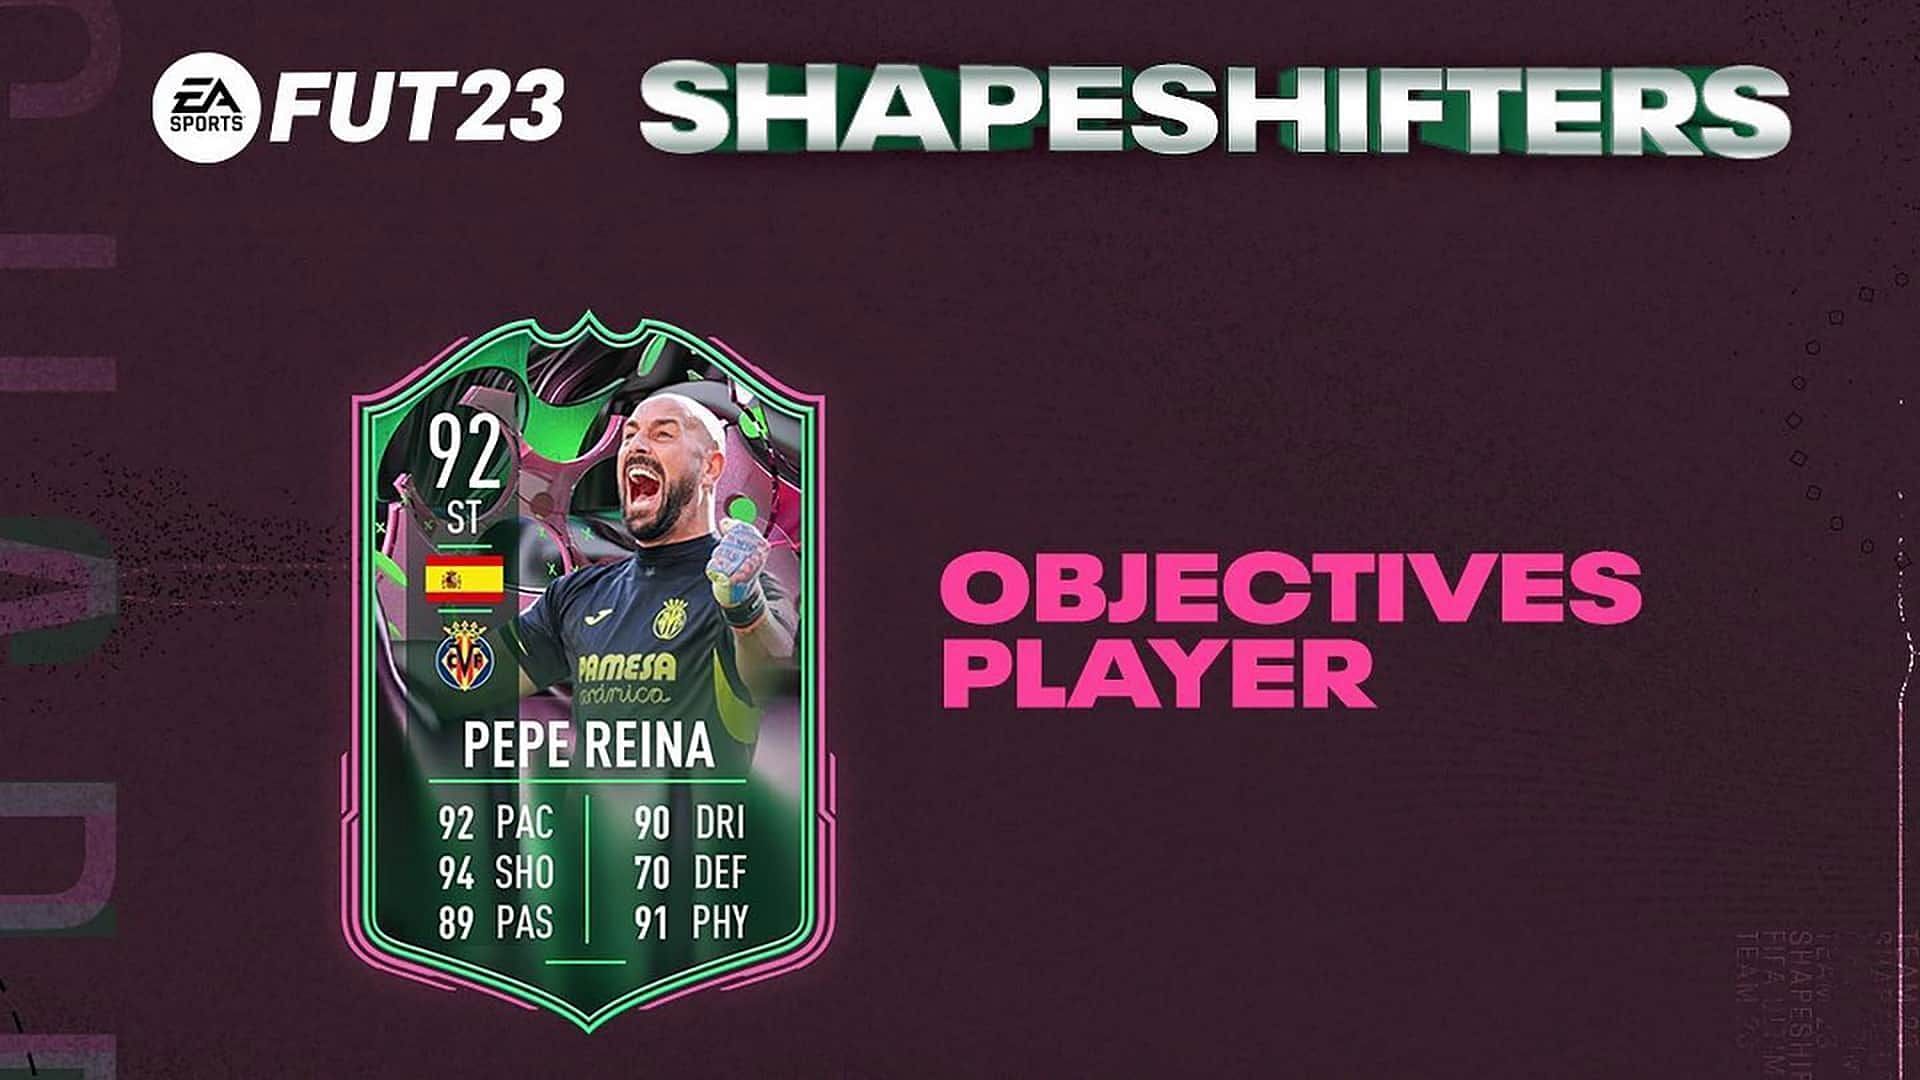 The Pepe Reina Shapeshifters objective features an unique card in FIFA 23 (Image via EA Sports)